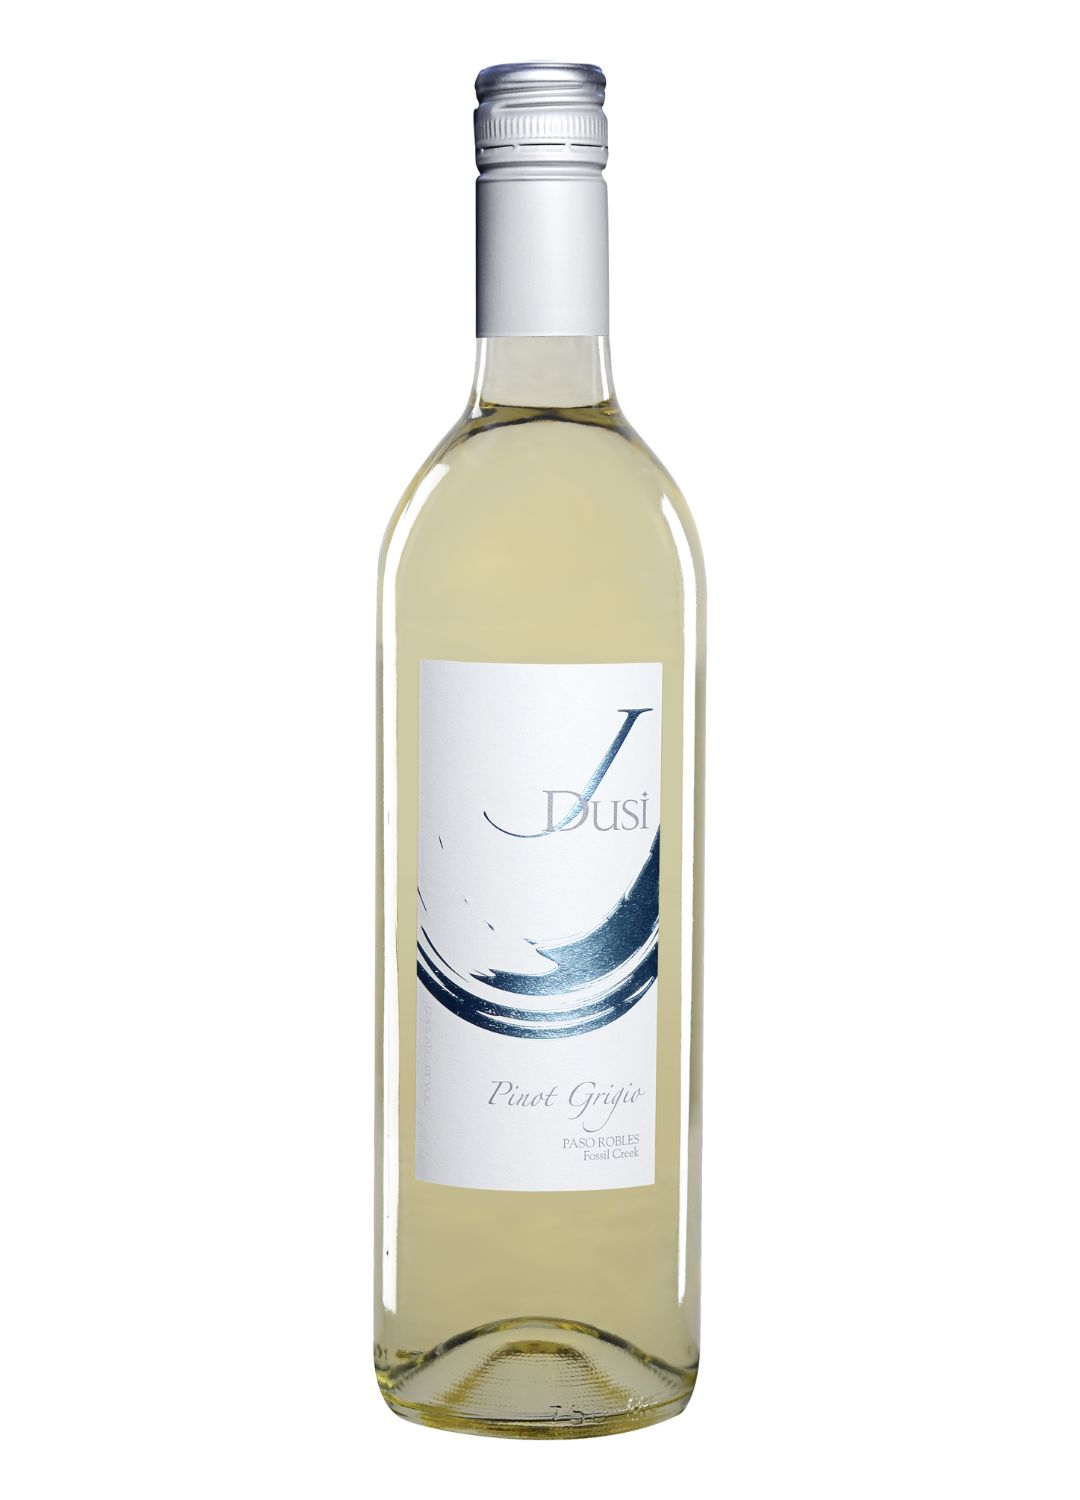 Bottle of Pinto Grigio from J Dusi Wines